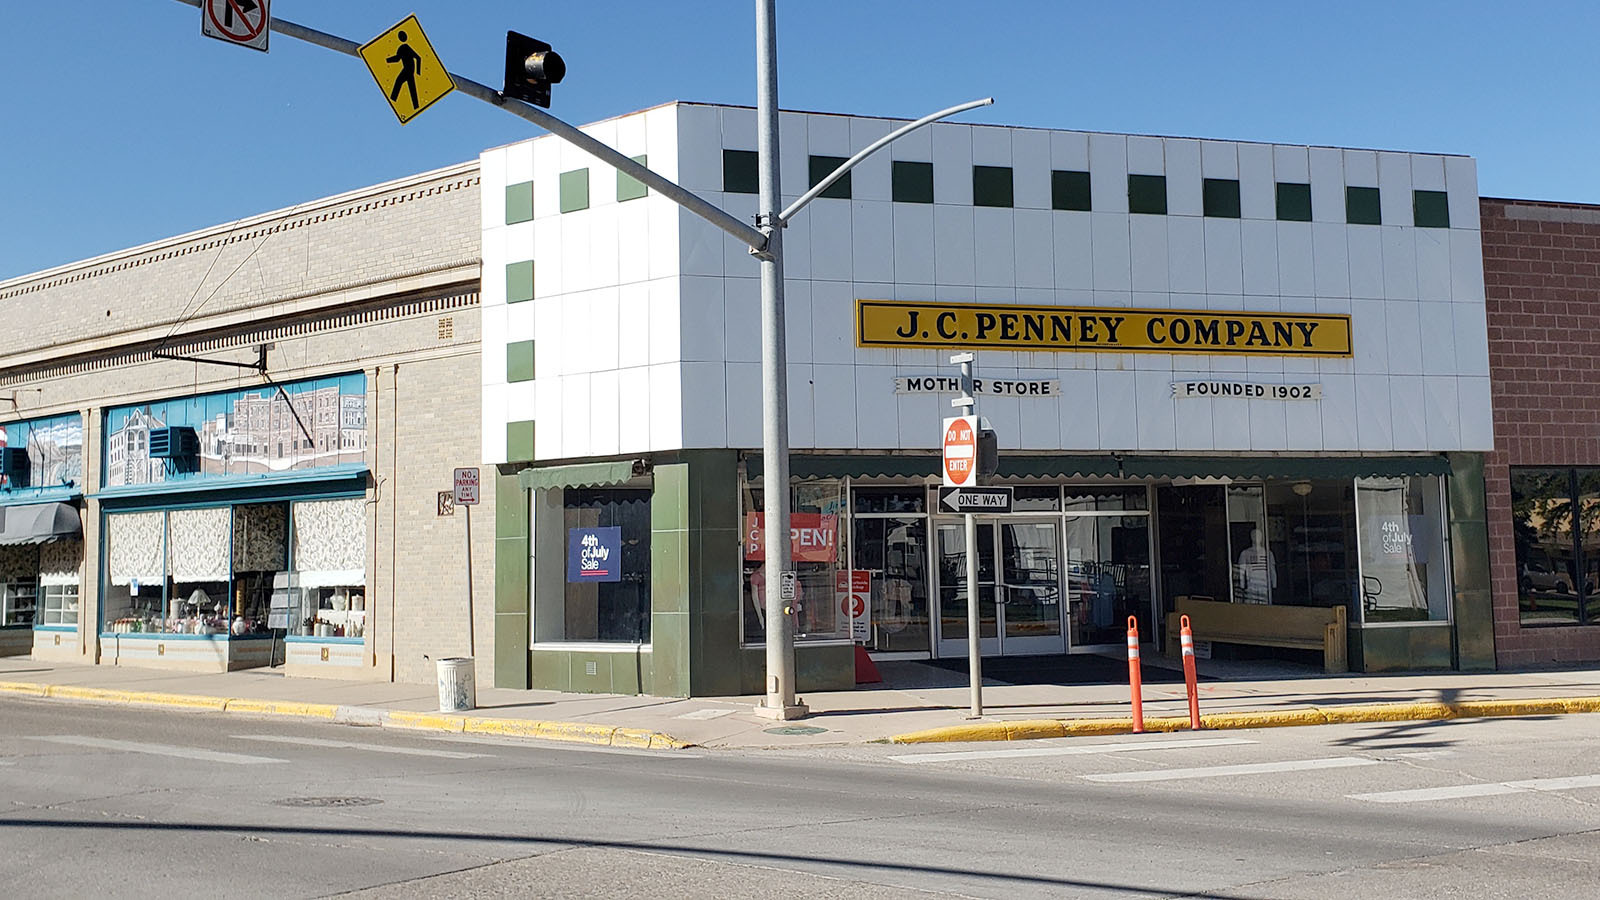 https://cowboystatedaily.imgix.net/JCPenney-store-The-exterior-of-the-JCPenney-store-in-Kemmerer-7.8.23.jpg